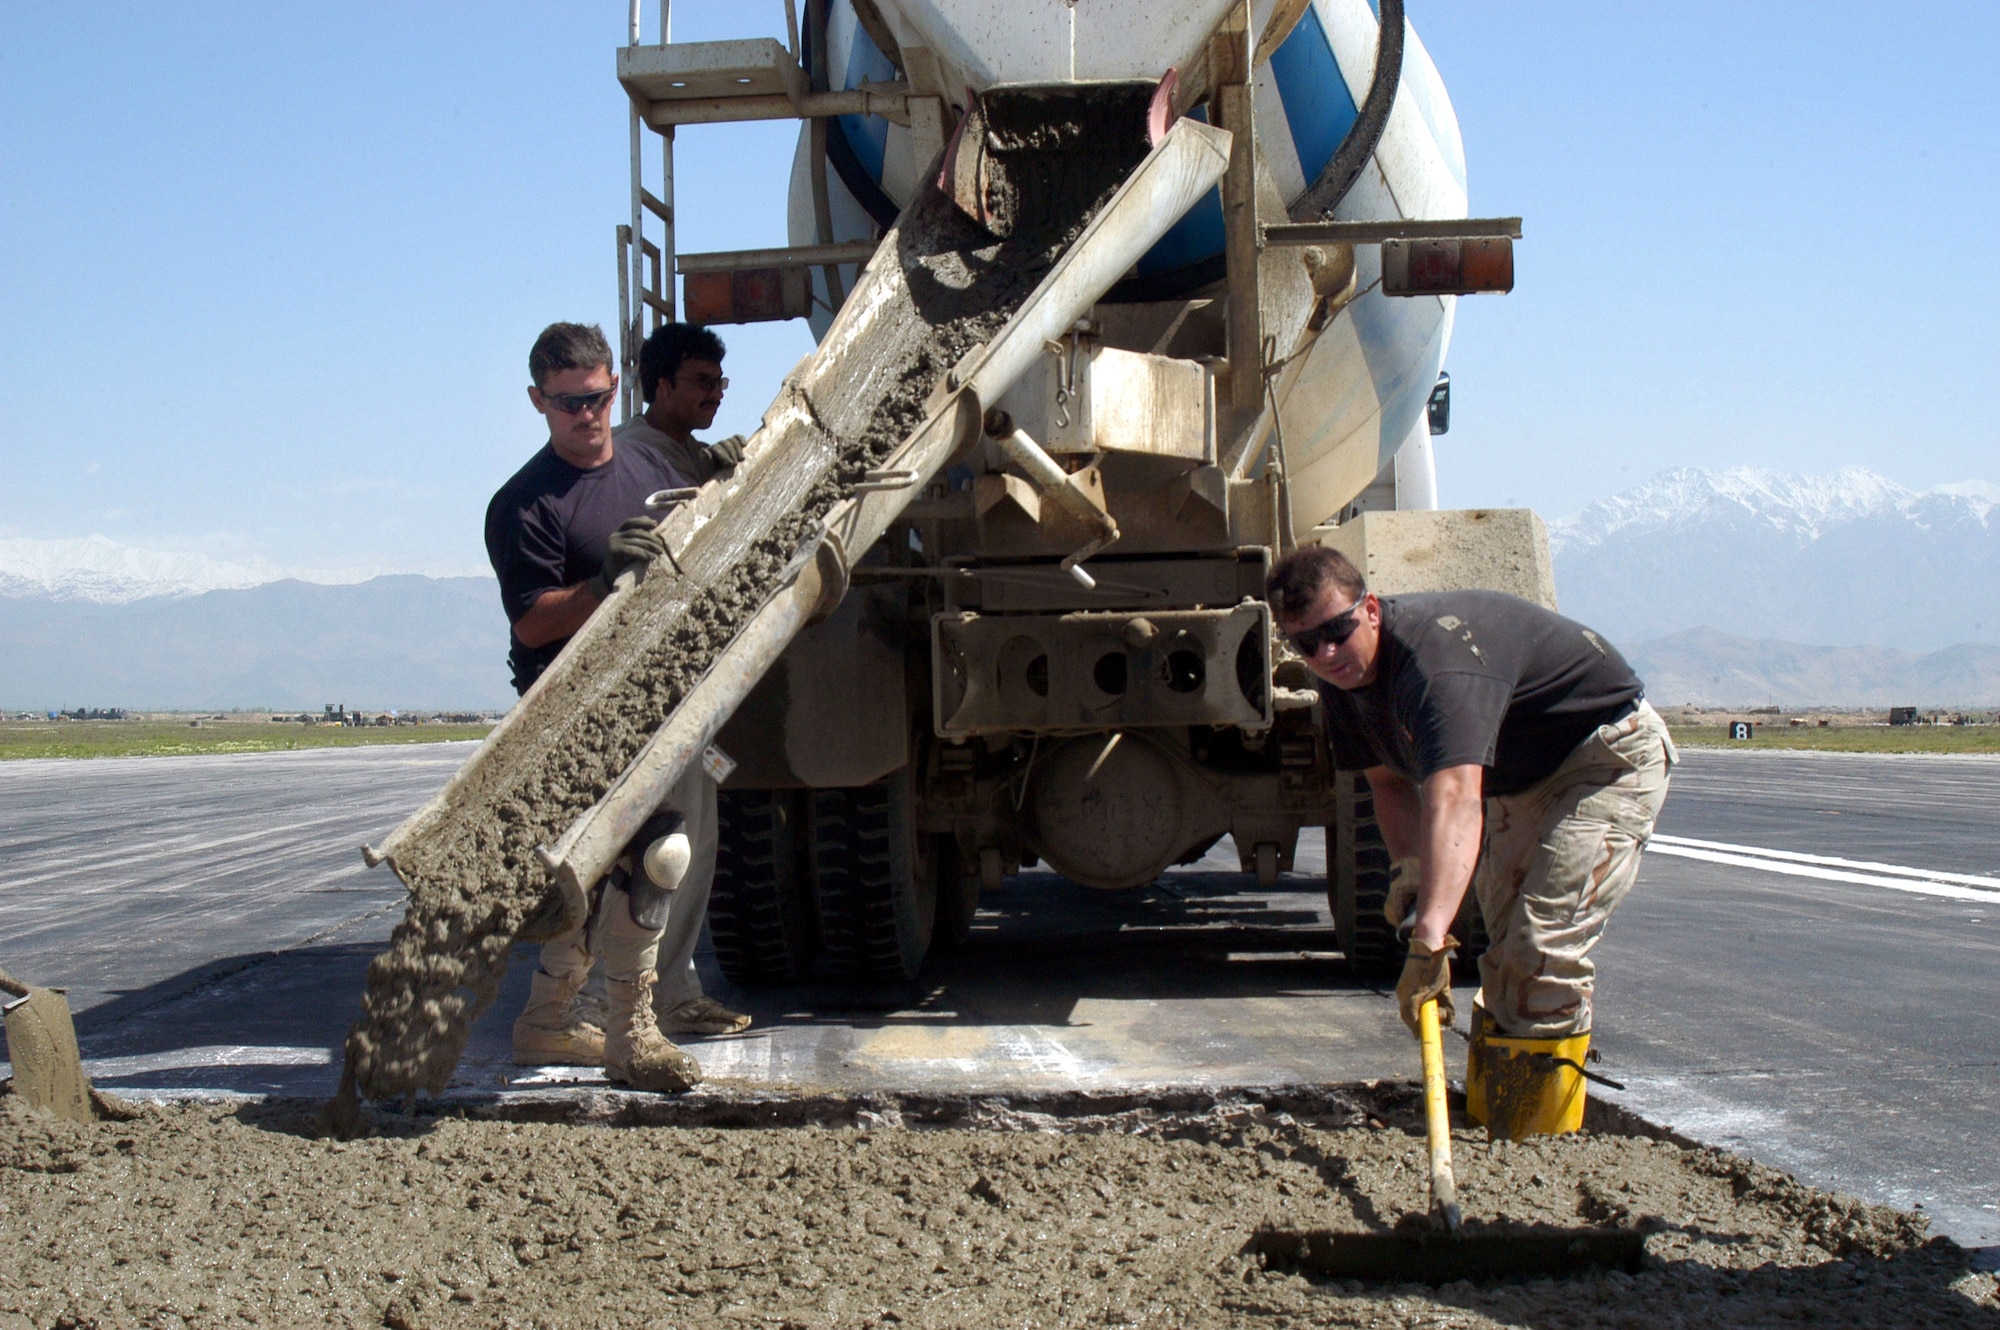 Tech. Sgt. John Foster (left) pours concrete on the active runway at Bagram Air Base, Afghanistan, as part of a $2.3 million airfield repair project. Tech. Sgt. James Holman spreads concrete in a hole. The runway project was one handled by Robert Owens, a civilian with the Tulsa Branch of the Army Corps of Engineers here. (U.S. Air Force photo/Tech. Sgt. Adam Johnston).